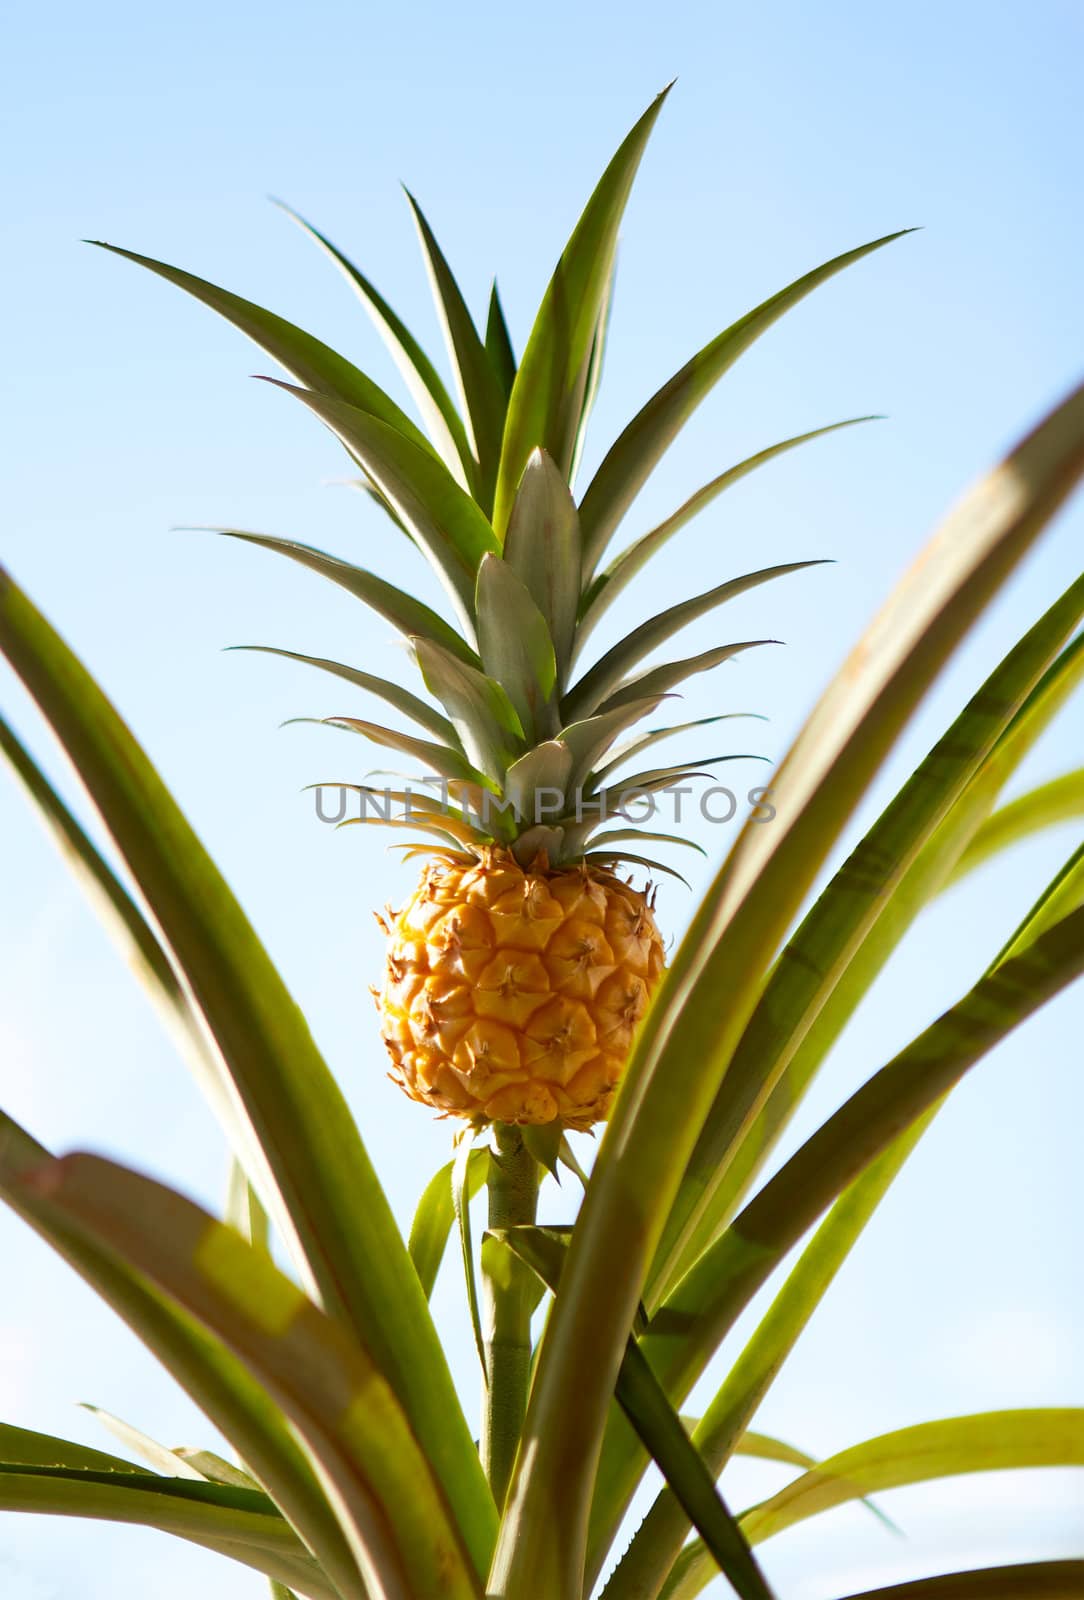 Pineapple on the plant tropical fruit on sky background